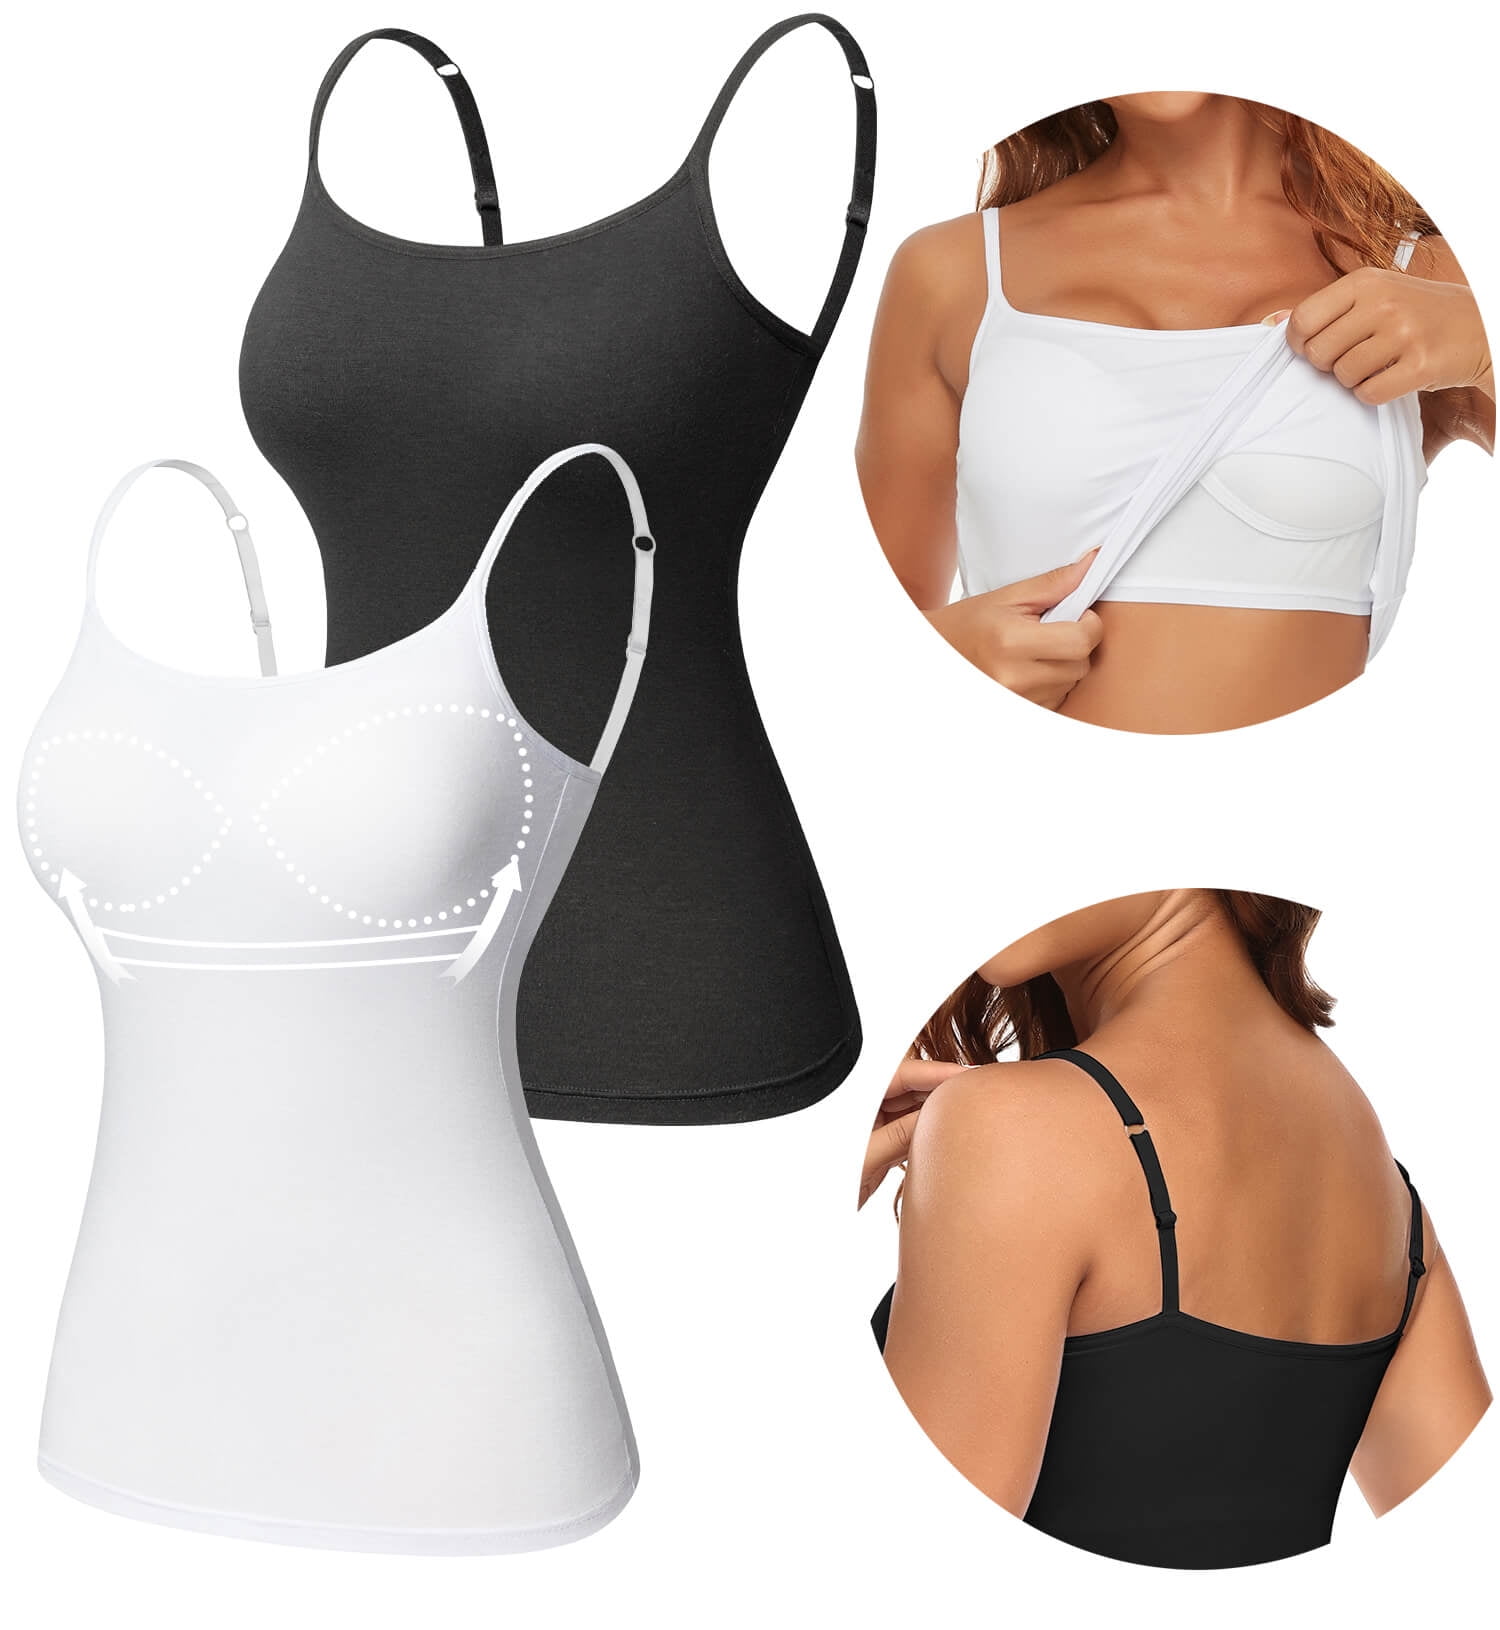 MANIFIQUE 3 Pack Women's Camisole with Built-in Padded Bra Adjustbale  Spaghetti Strap Tank Top Cami Comfort Undershirt 